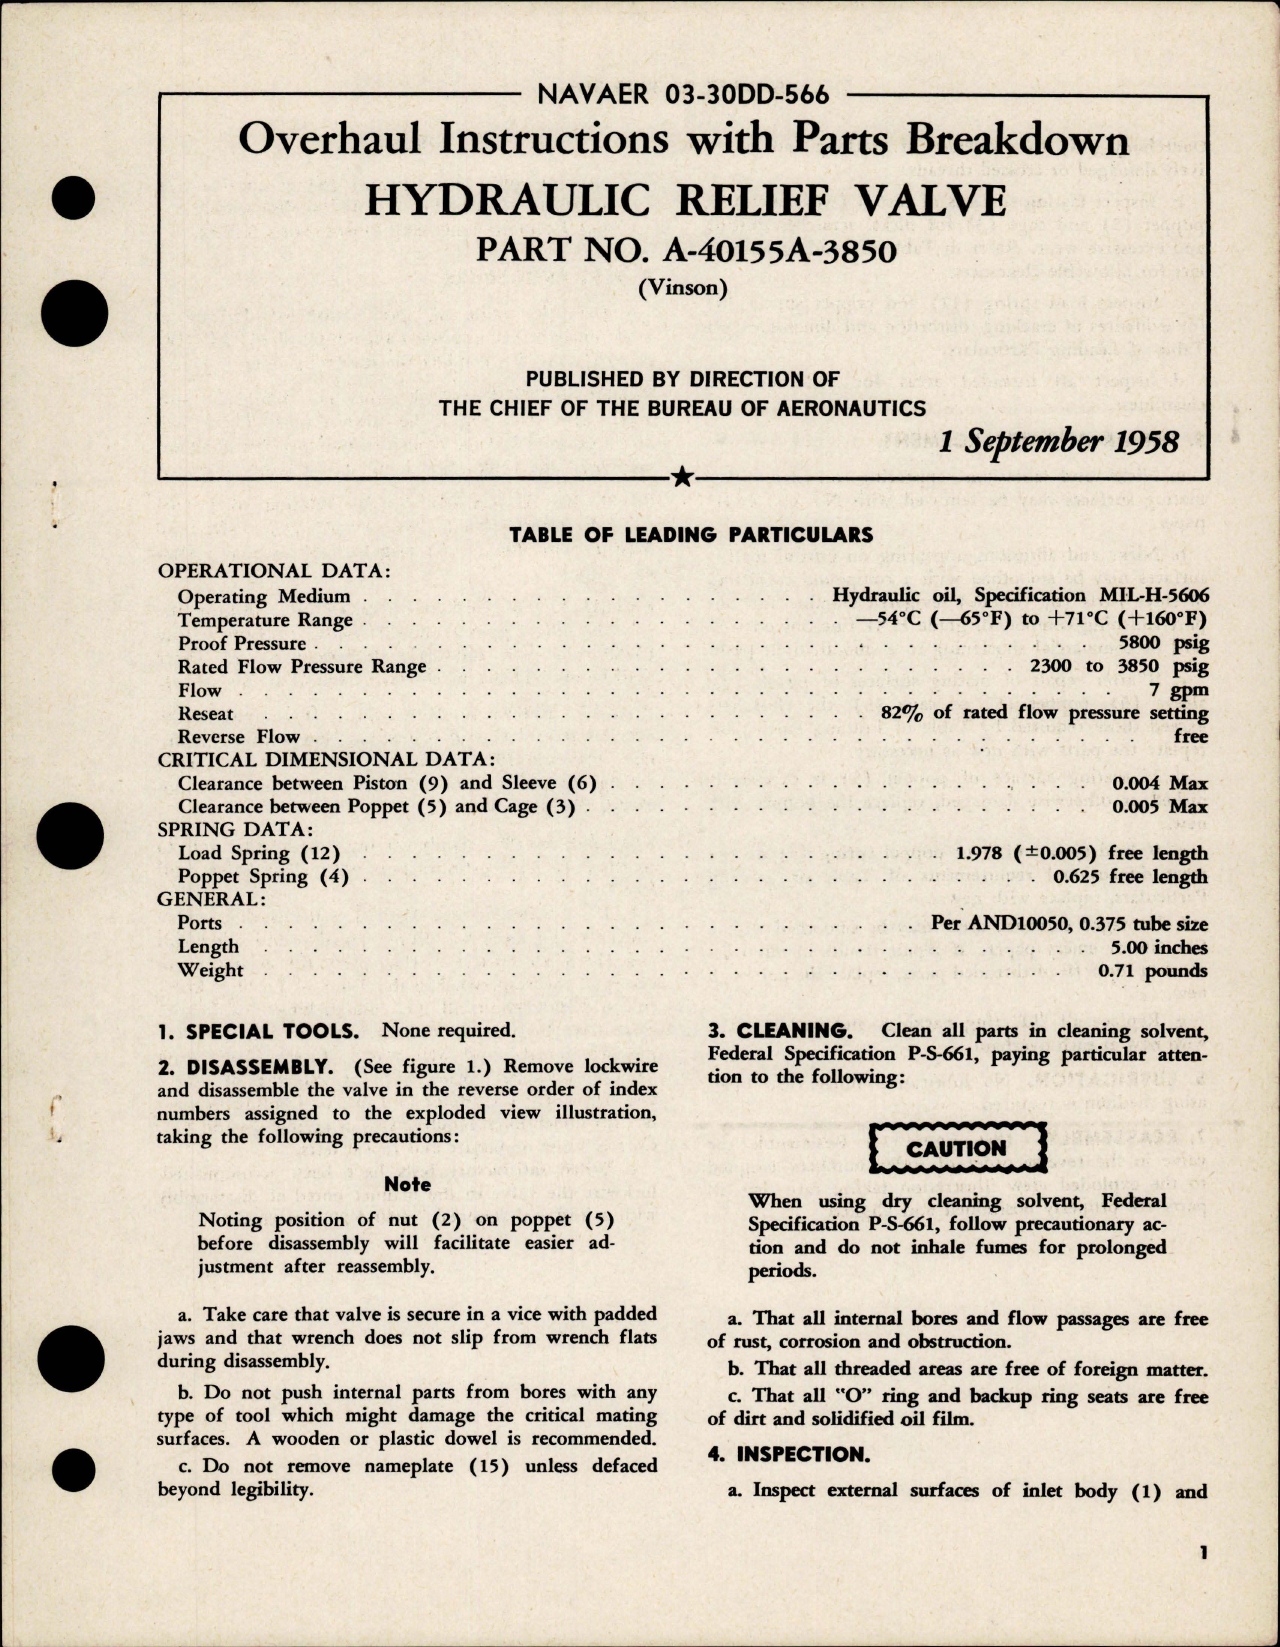 Sample page 1 from AirCorps Library document: Overhaul Instructions with Parts Breakdown for Hydraulic Relief Valve - Part A-40155A-3850 